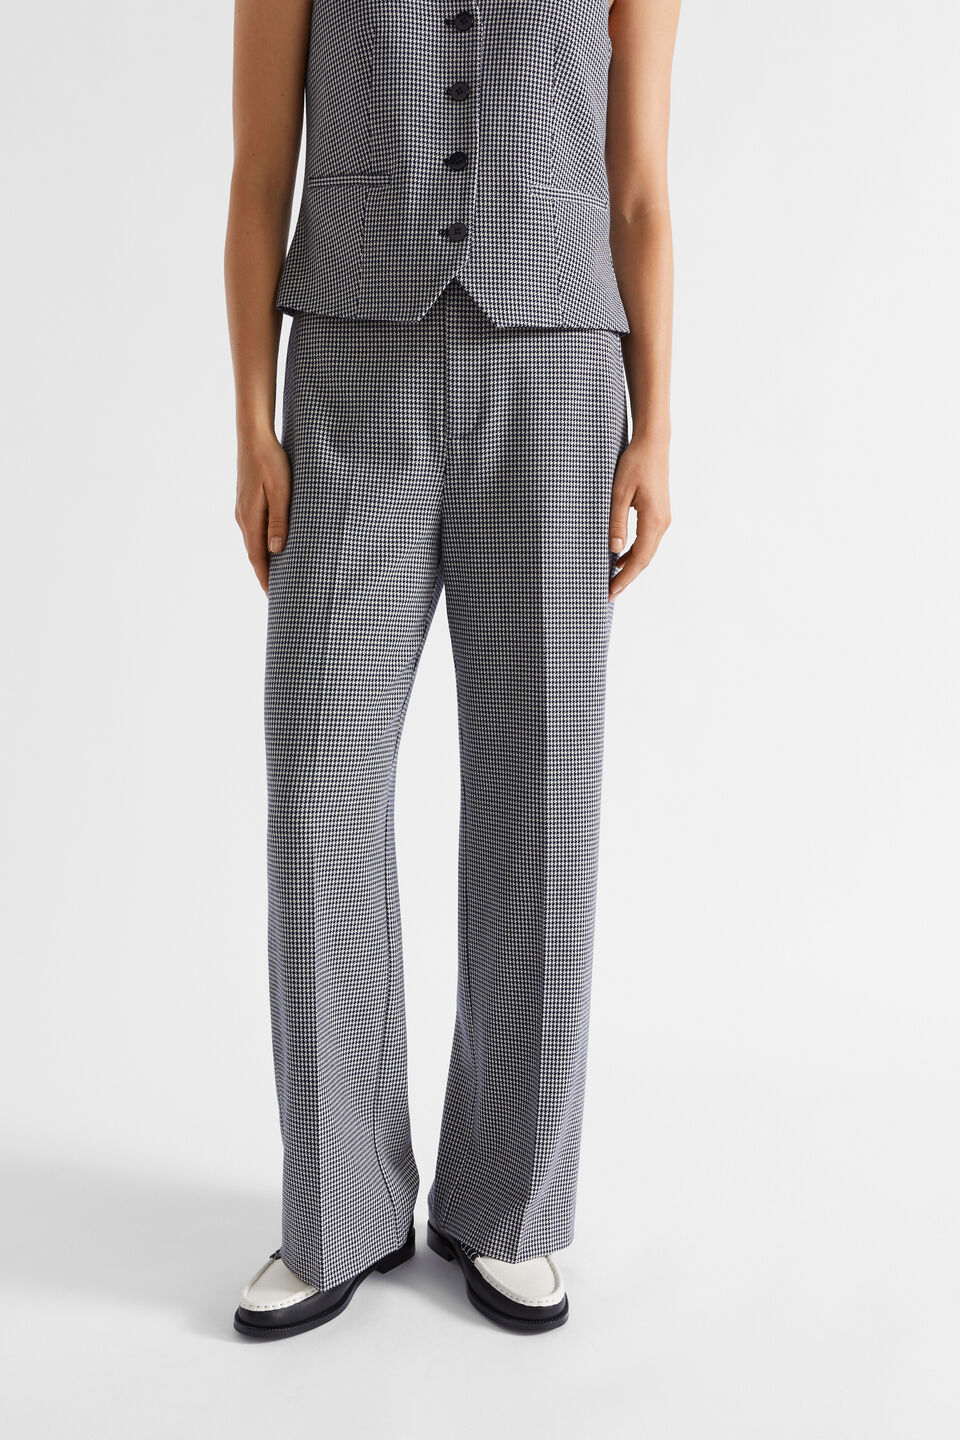 Houndstooth High Waisted Pant  Midnight Sky Houndstooth  hi-res